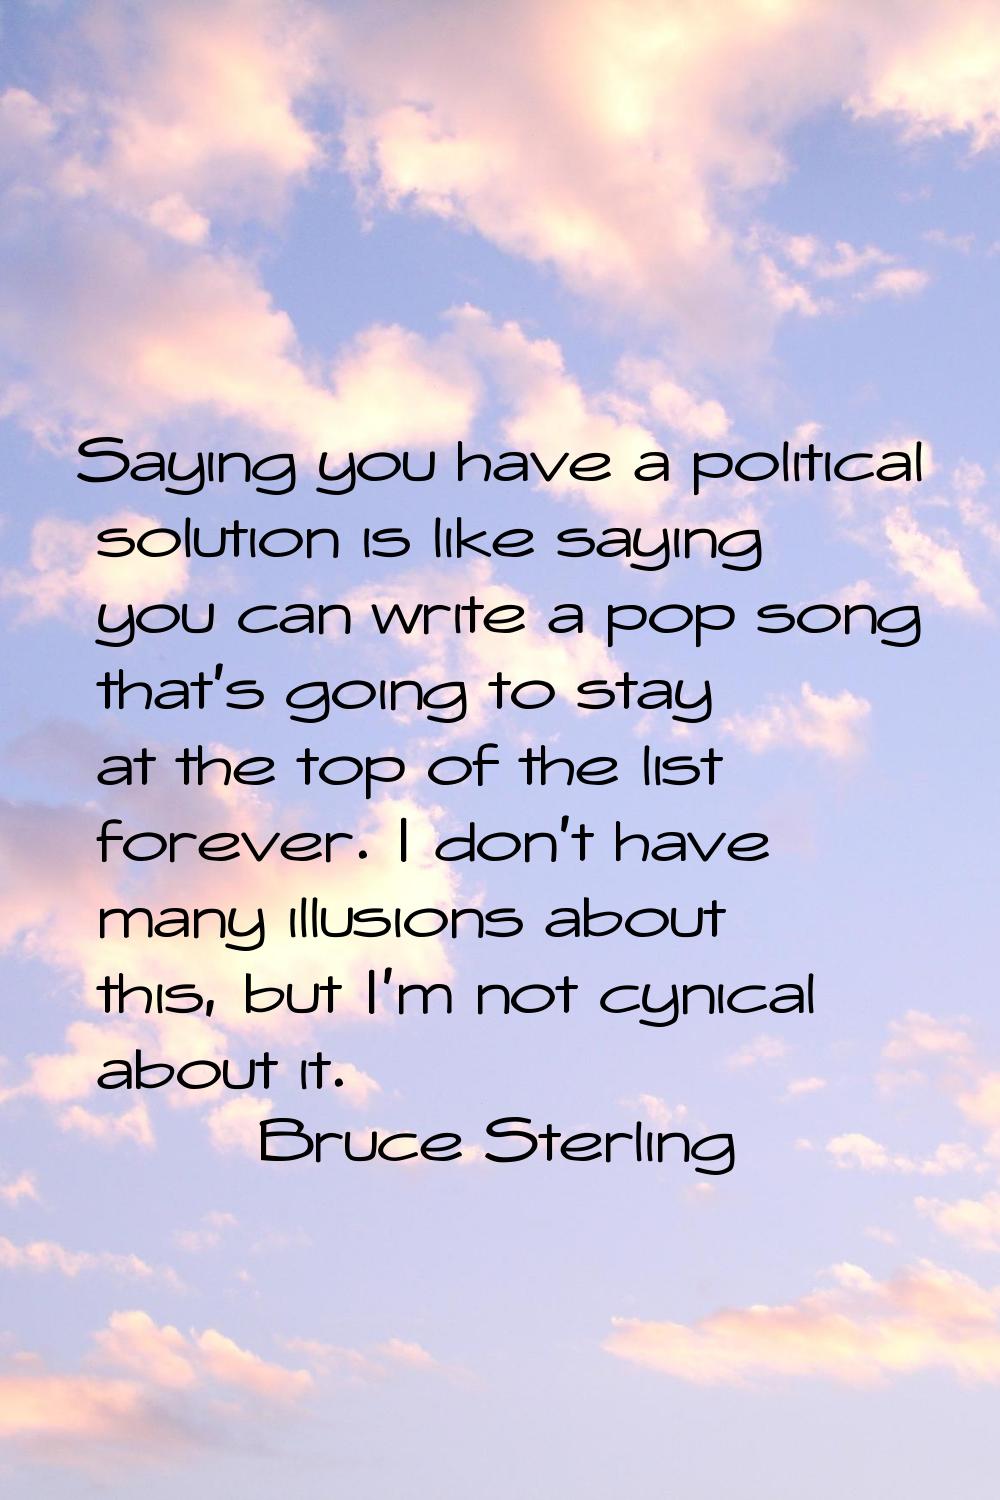 Saying you have a political solution is like saying you can write a pop song that's going to stay a